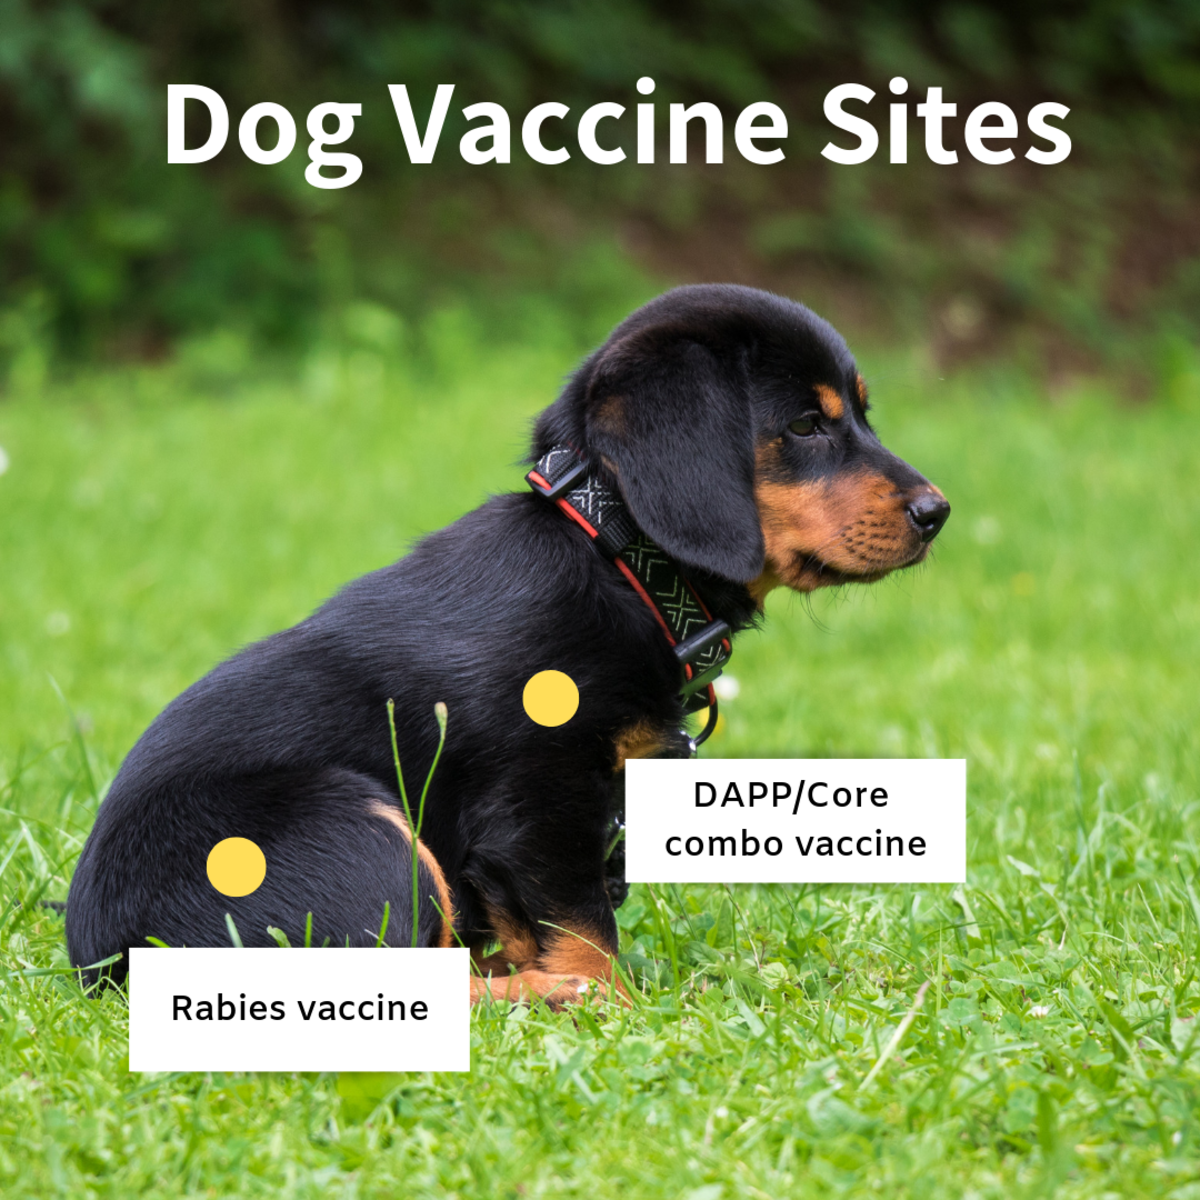 Vaccination sites on a dog located on the right side of the body.